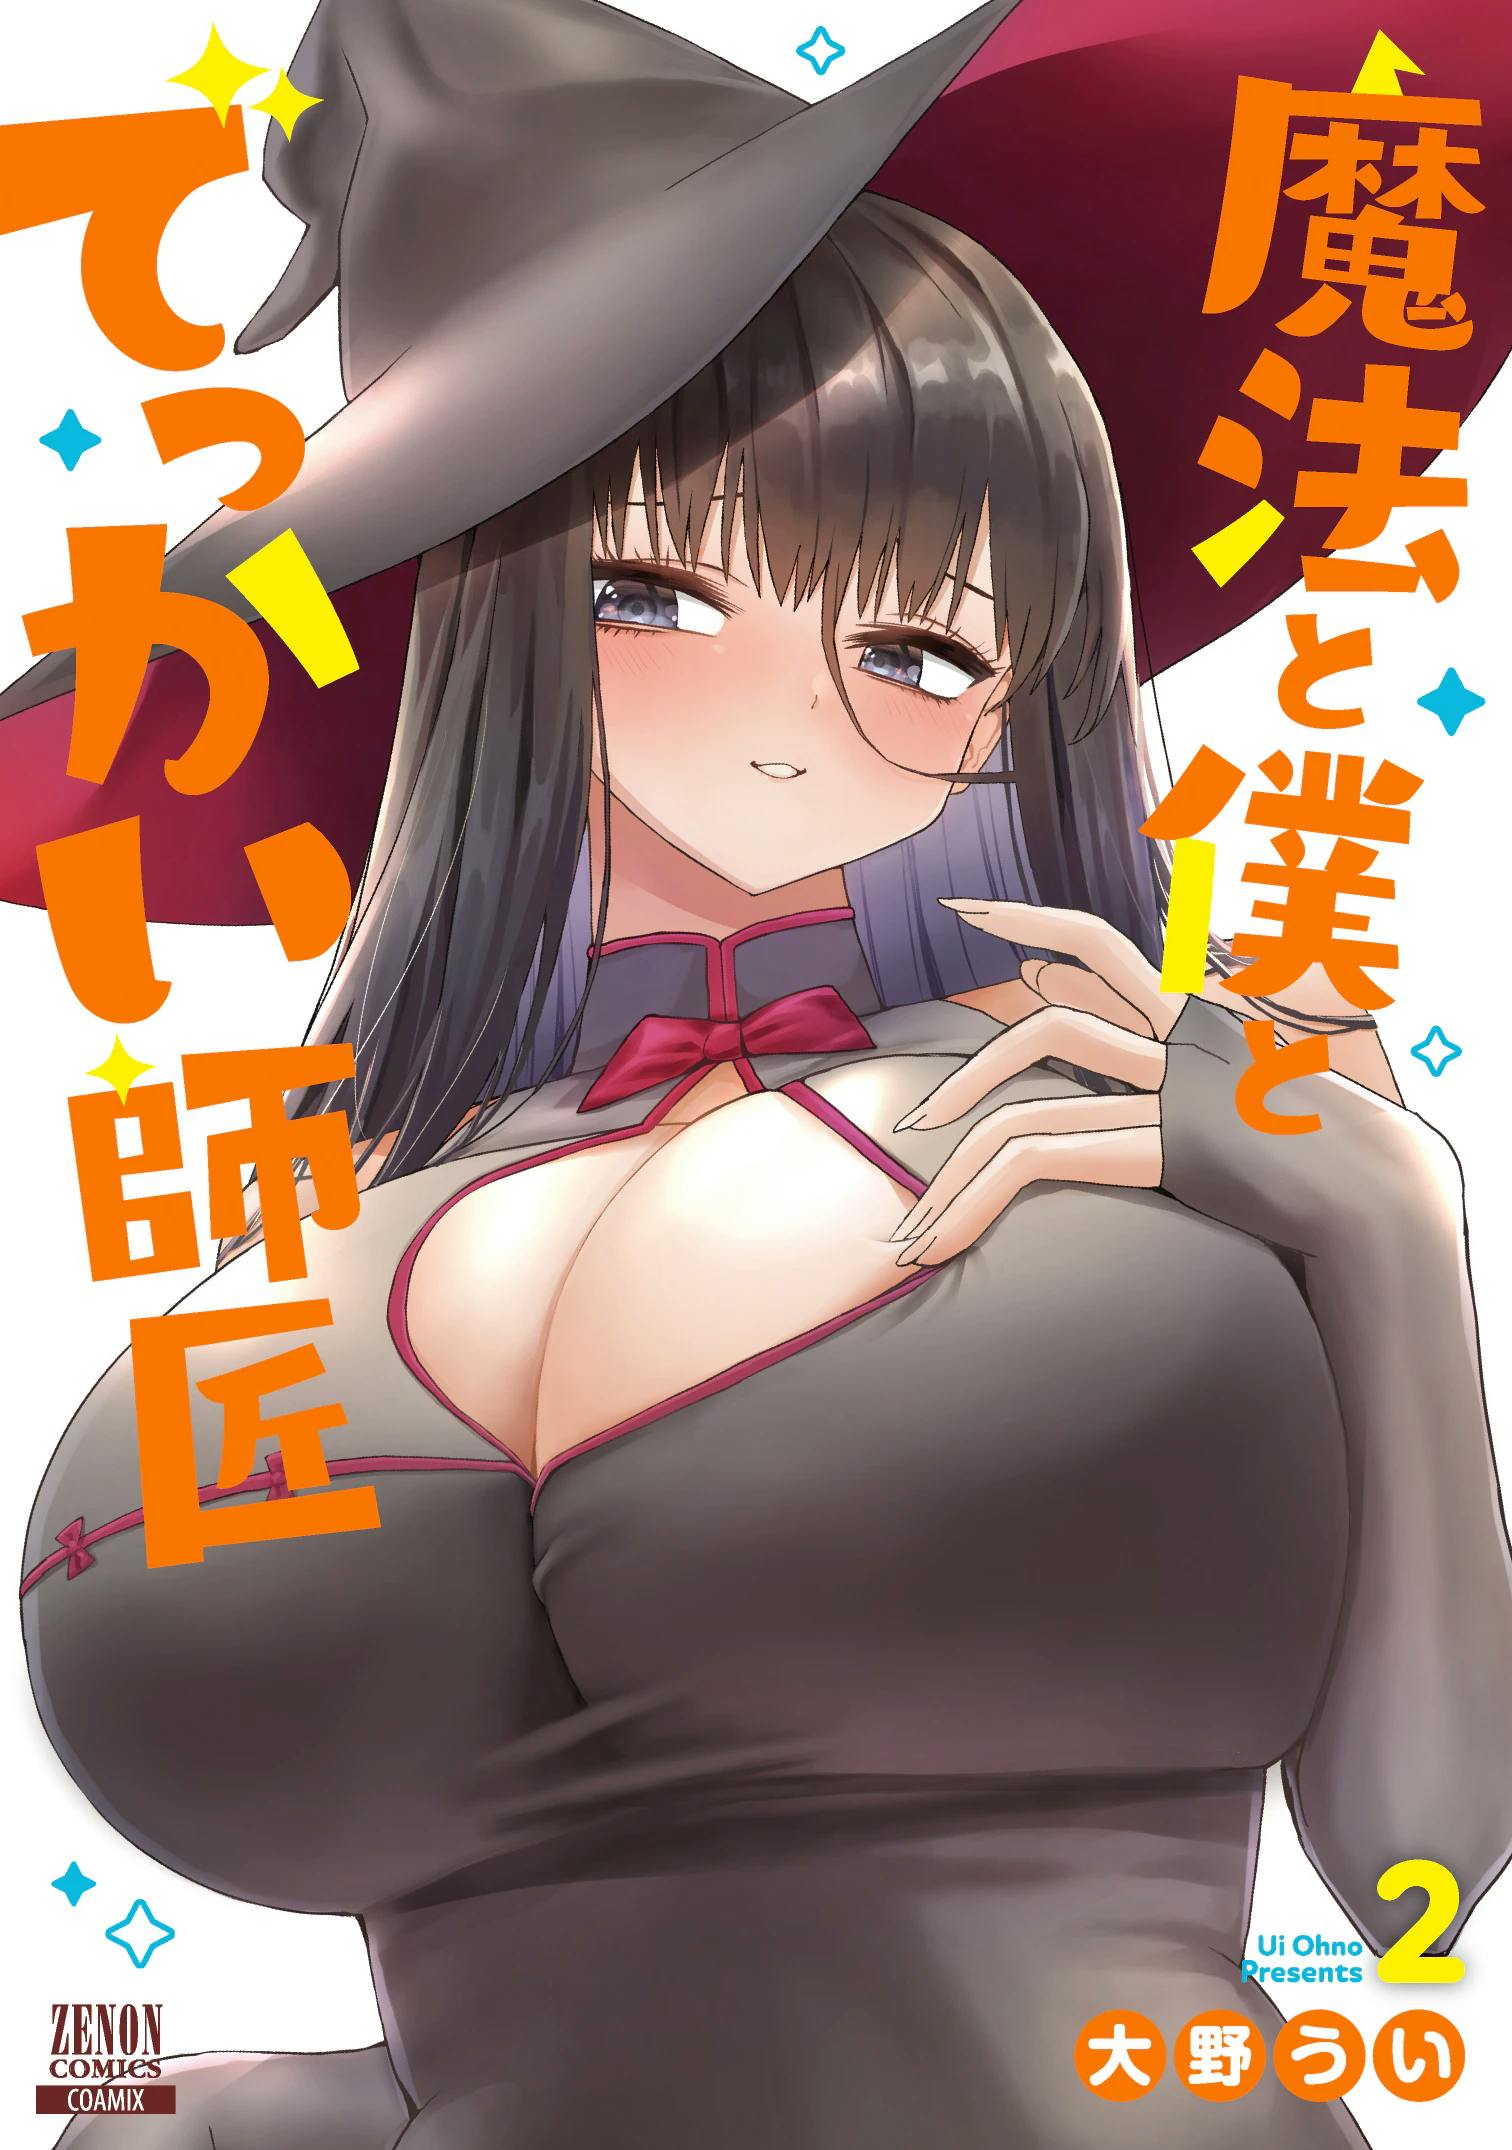 100cm height difference! Your heart is bound to be excited by this big girl! “Magic, Boku and Big Master” Volume 2 will be released on February 20th!